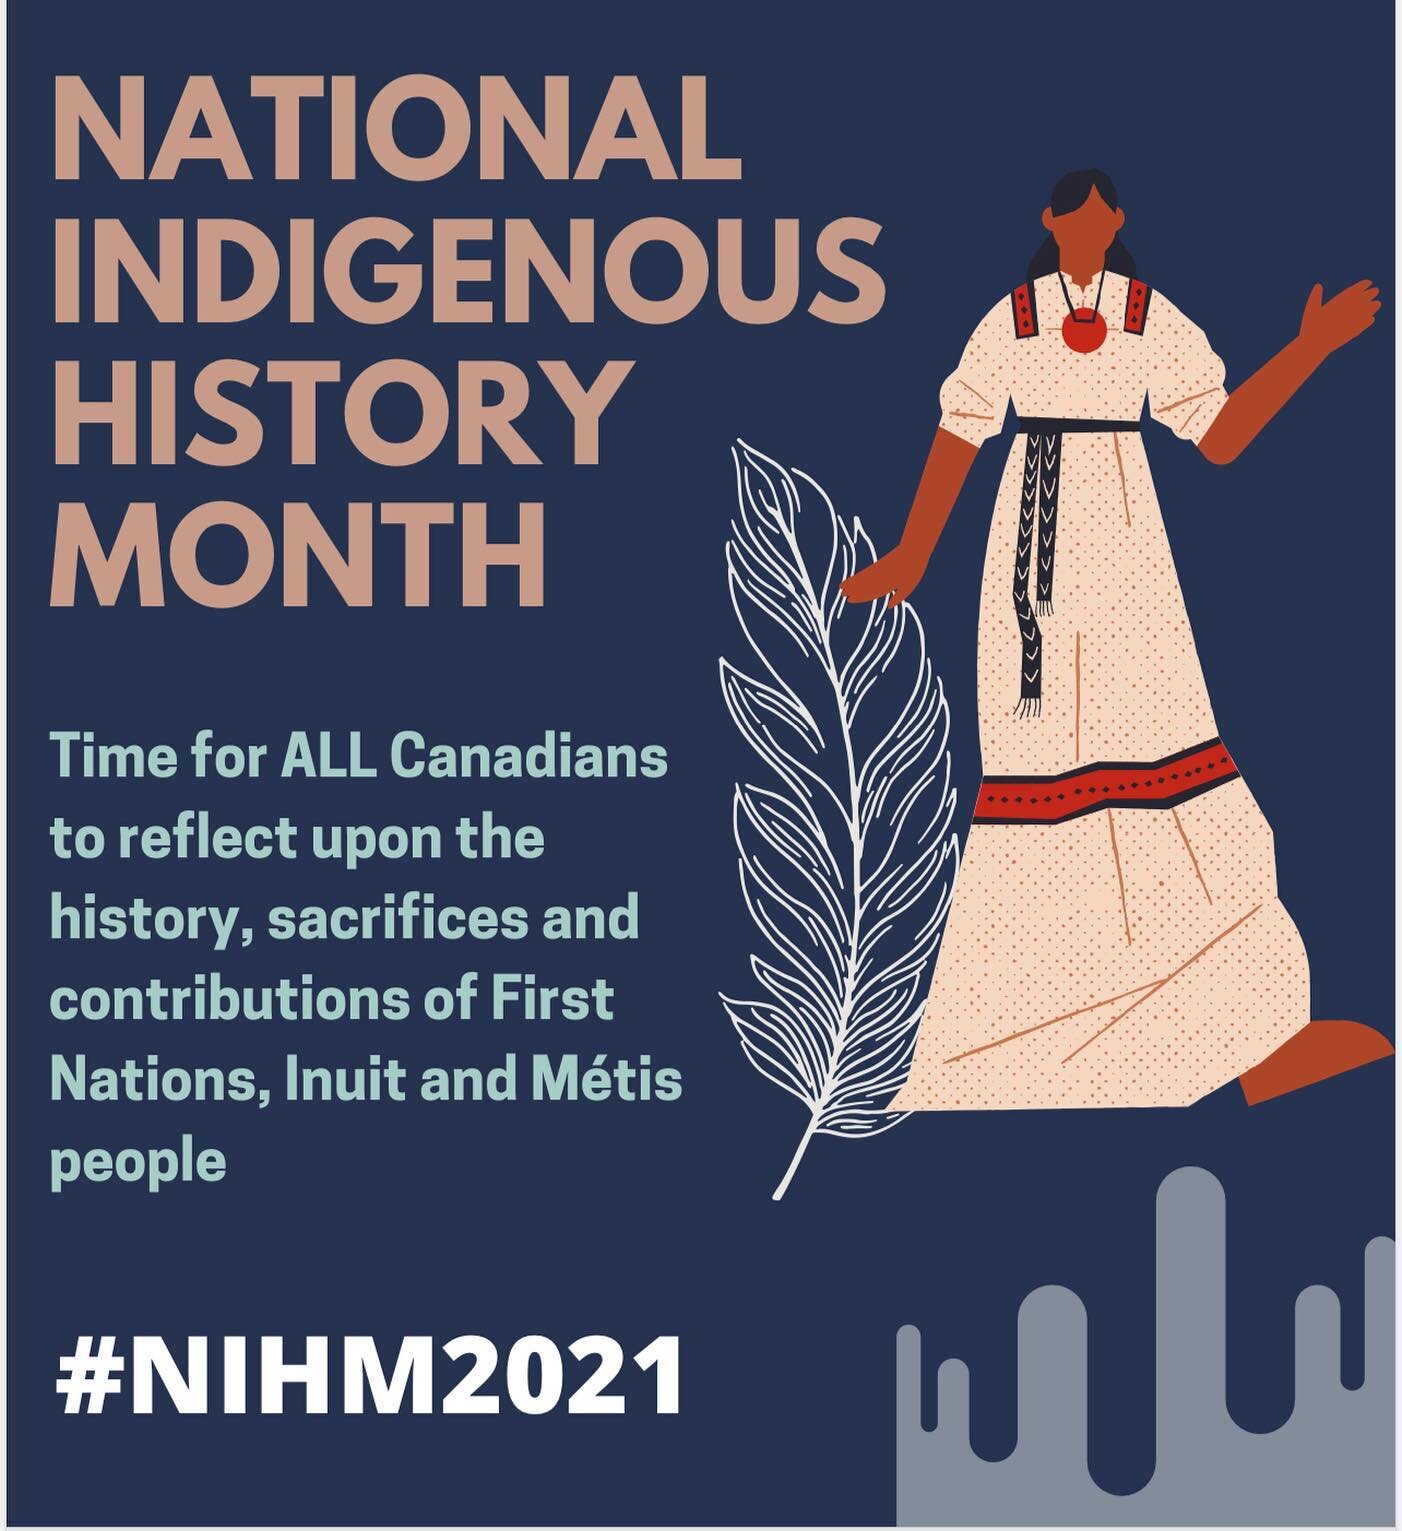 Happy Indigenous Peoples Day! 🌍✨

The month of June is National Indigenous History Month. This is a time to honour and celebrate the culture and contributions of First Nations, Inuit, and Métis people. It is also a time to recognize the strength of